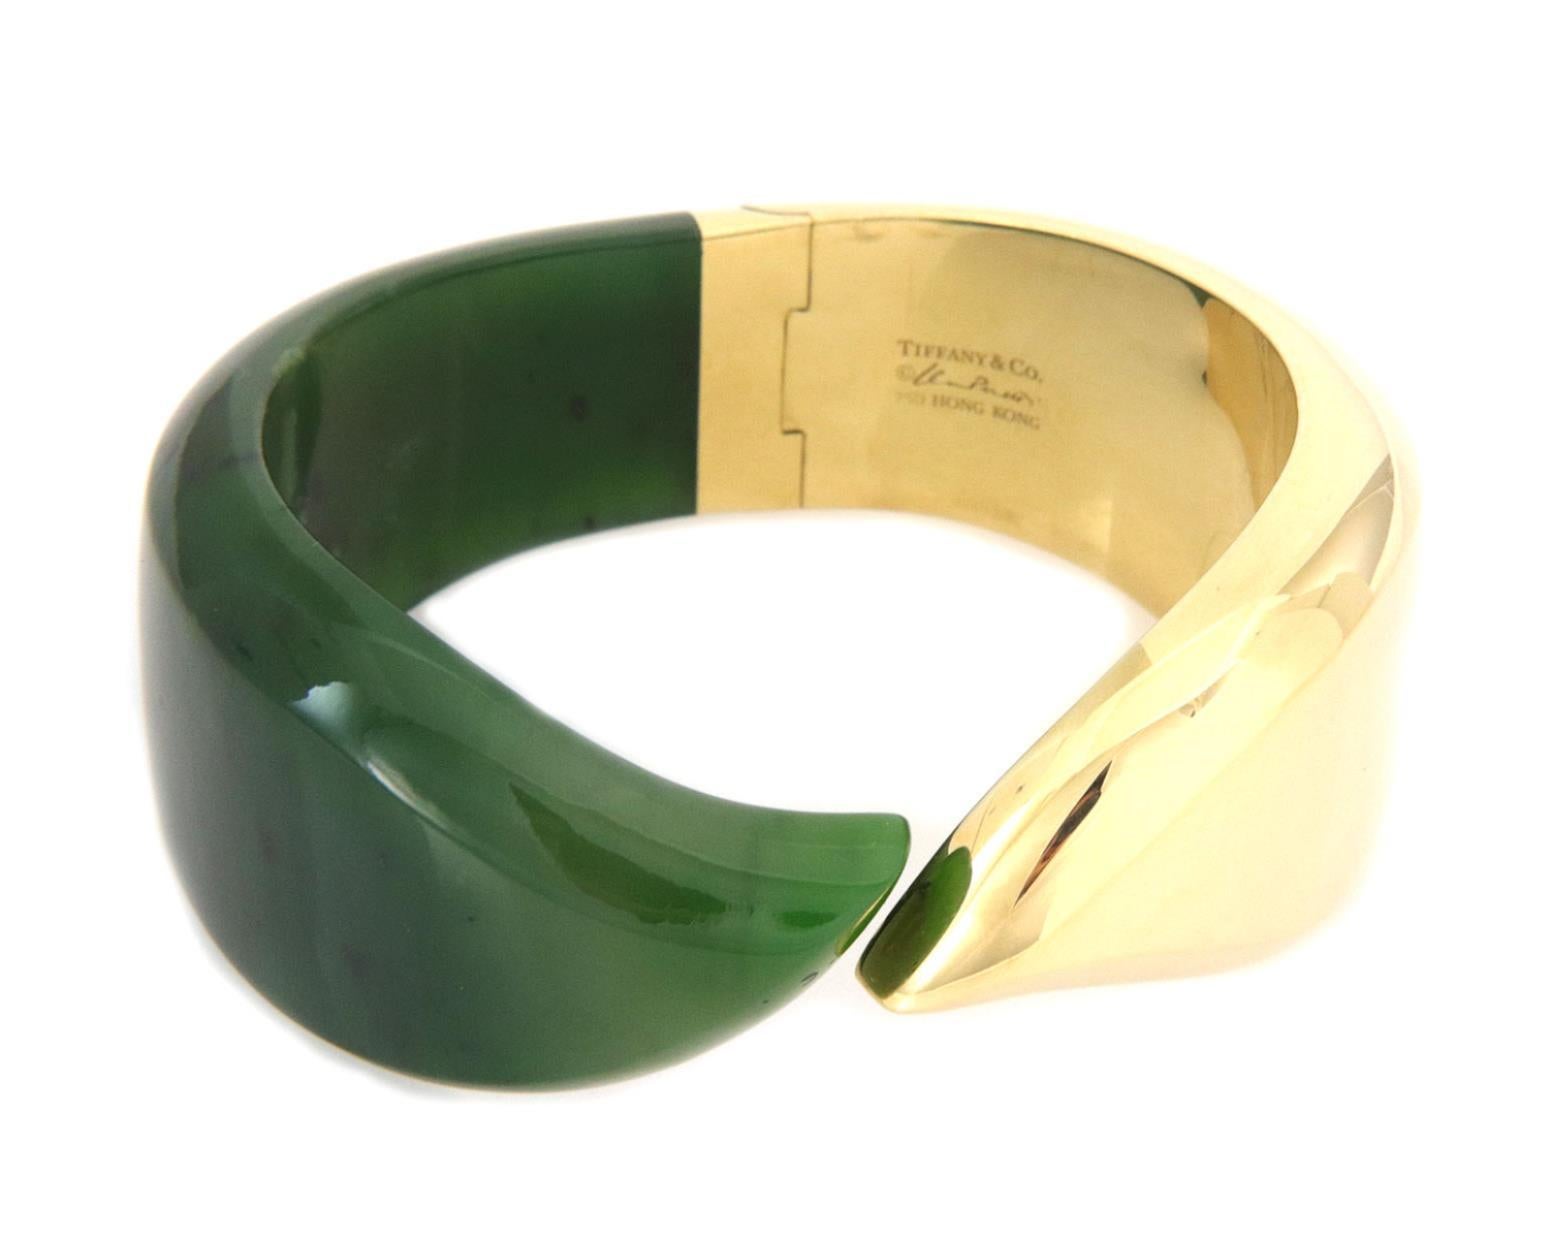 This is a chic authentic and fashionable bracelet from Tiffany & Co. by Elsa Peretti. From 18k yellow gold with a high polished finish featuring a hinge mechanism at the back of the band with half of the band is grass green jade and the other half